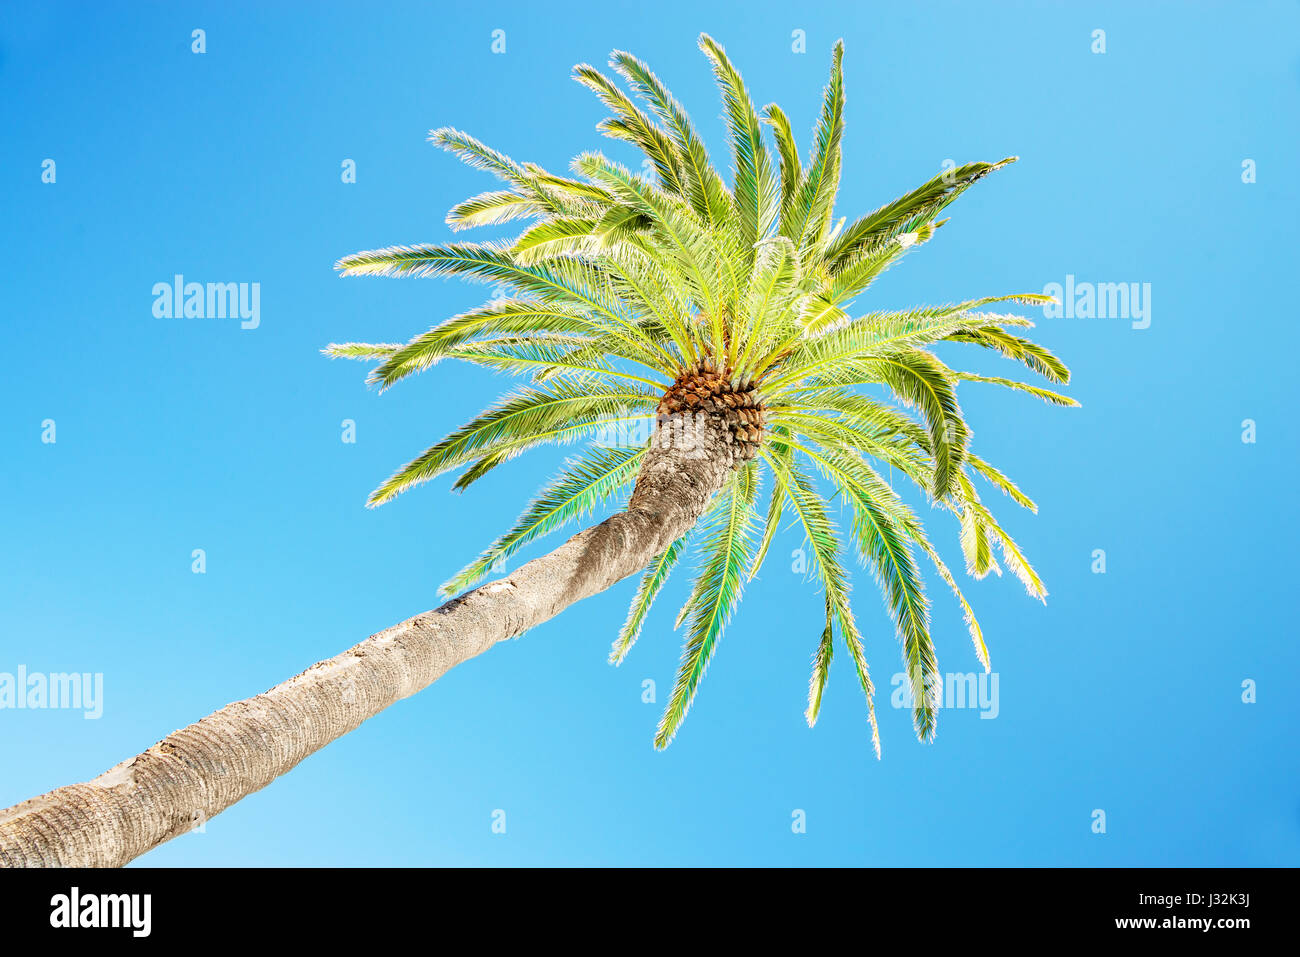 Looking up at leaning palm tree against blue sky, view from below, tropical travel and tourism concept Stock Photo